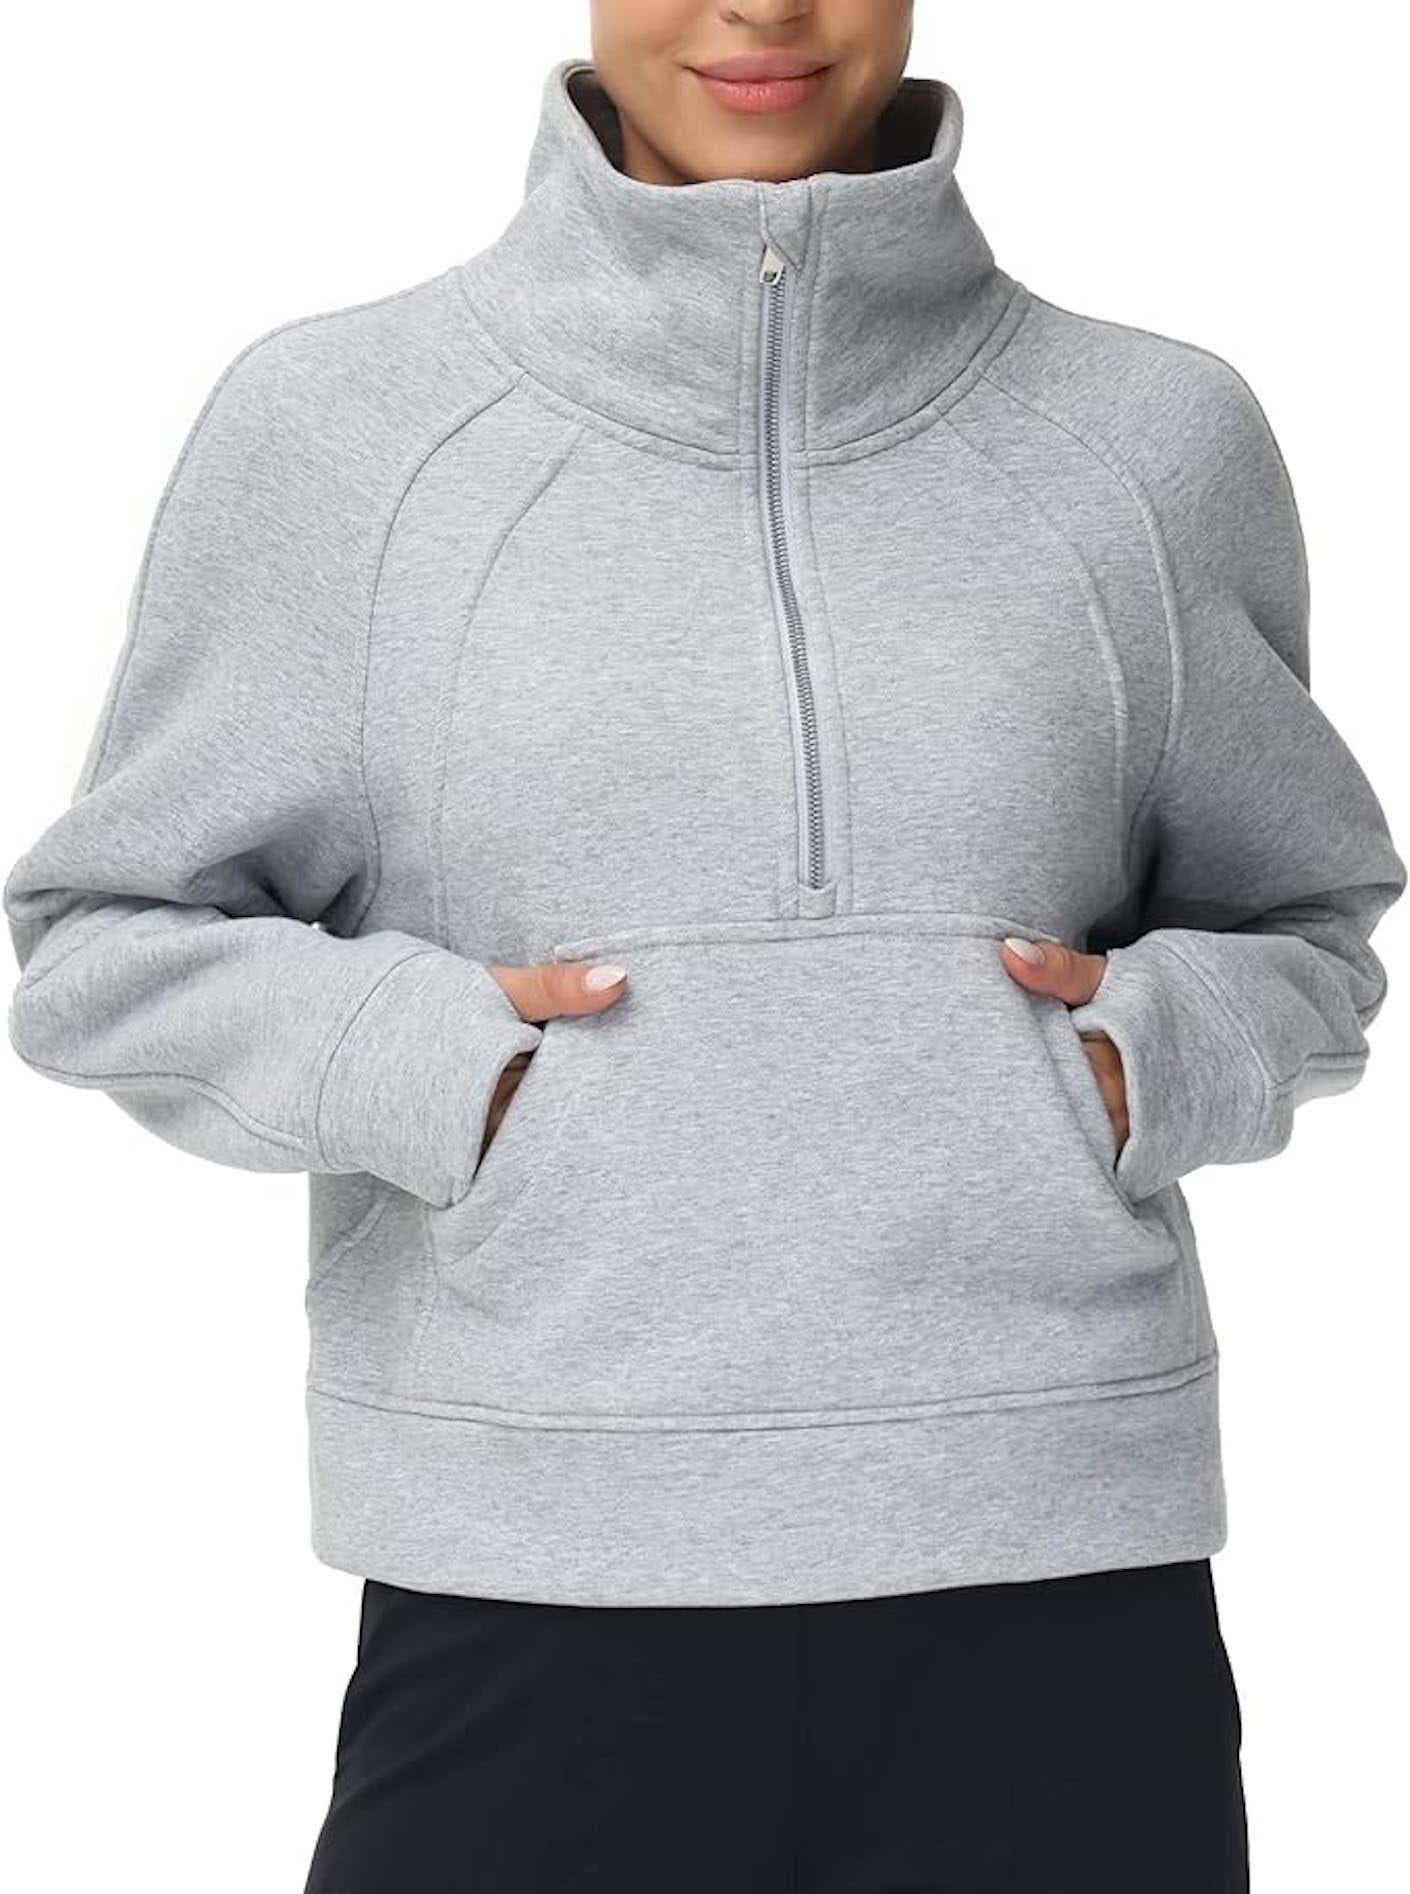 CRZ YOGA Butterluxe Womens Hooded Workout Jacket - Zip Up Athletic Running  Jacket